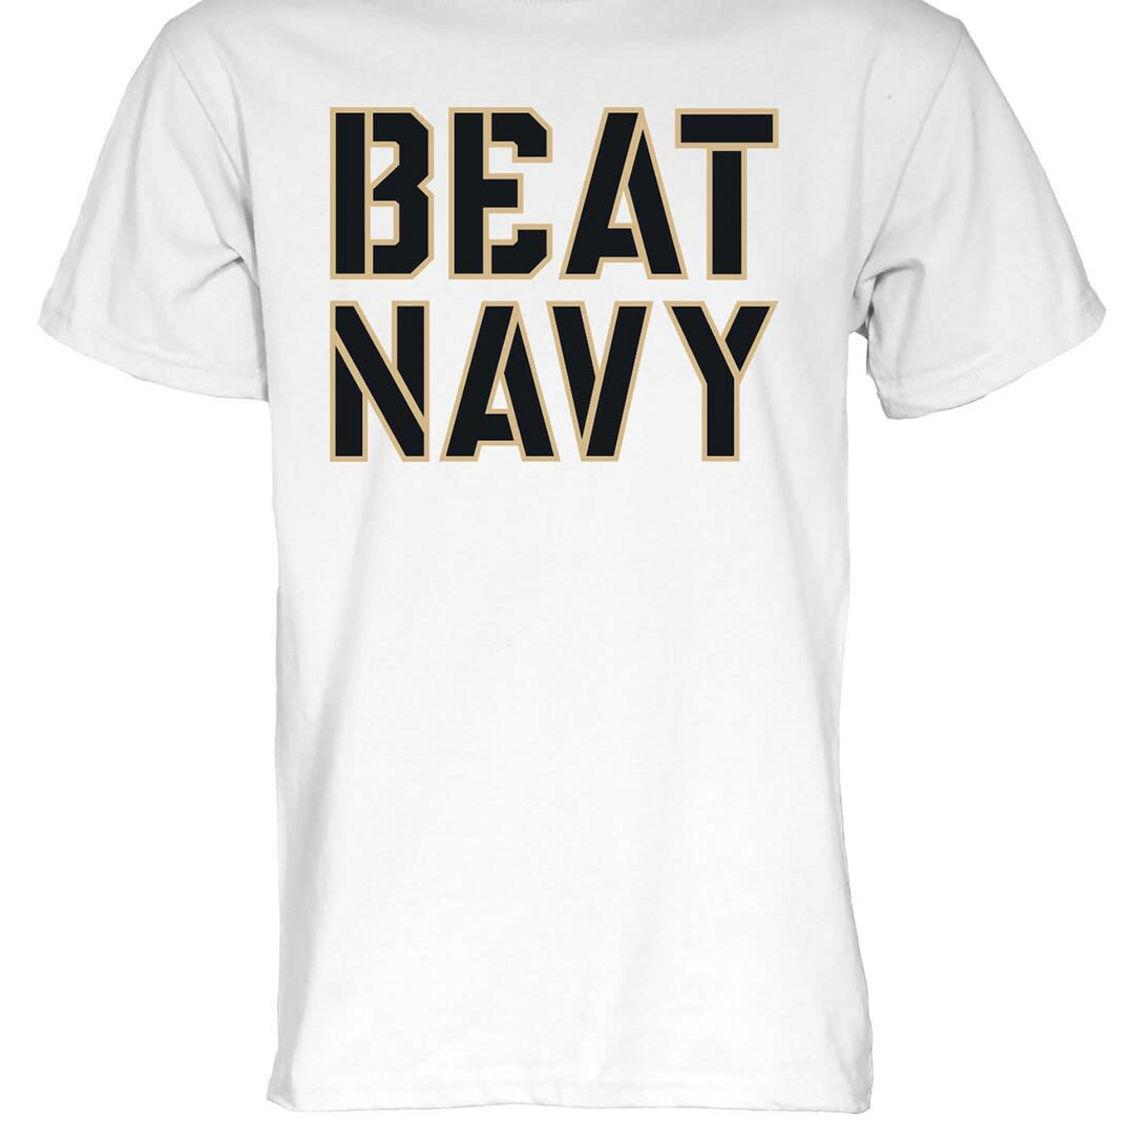 Blue 84 Men's White Army Black Knights Beat Navy T-Shirt - Image 3 of 4